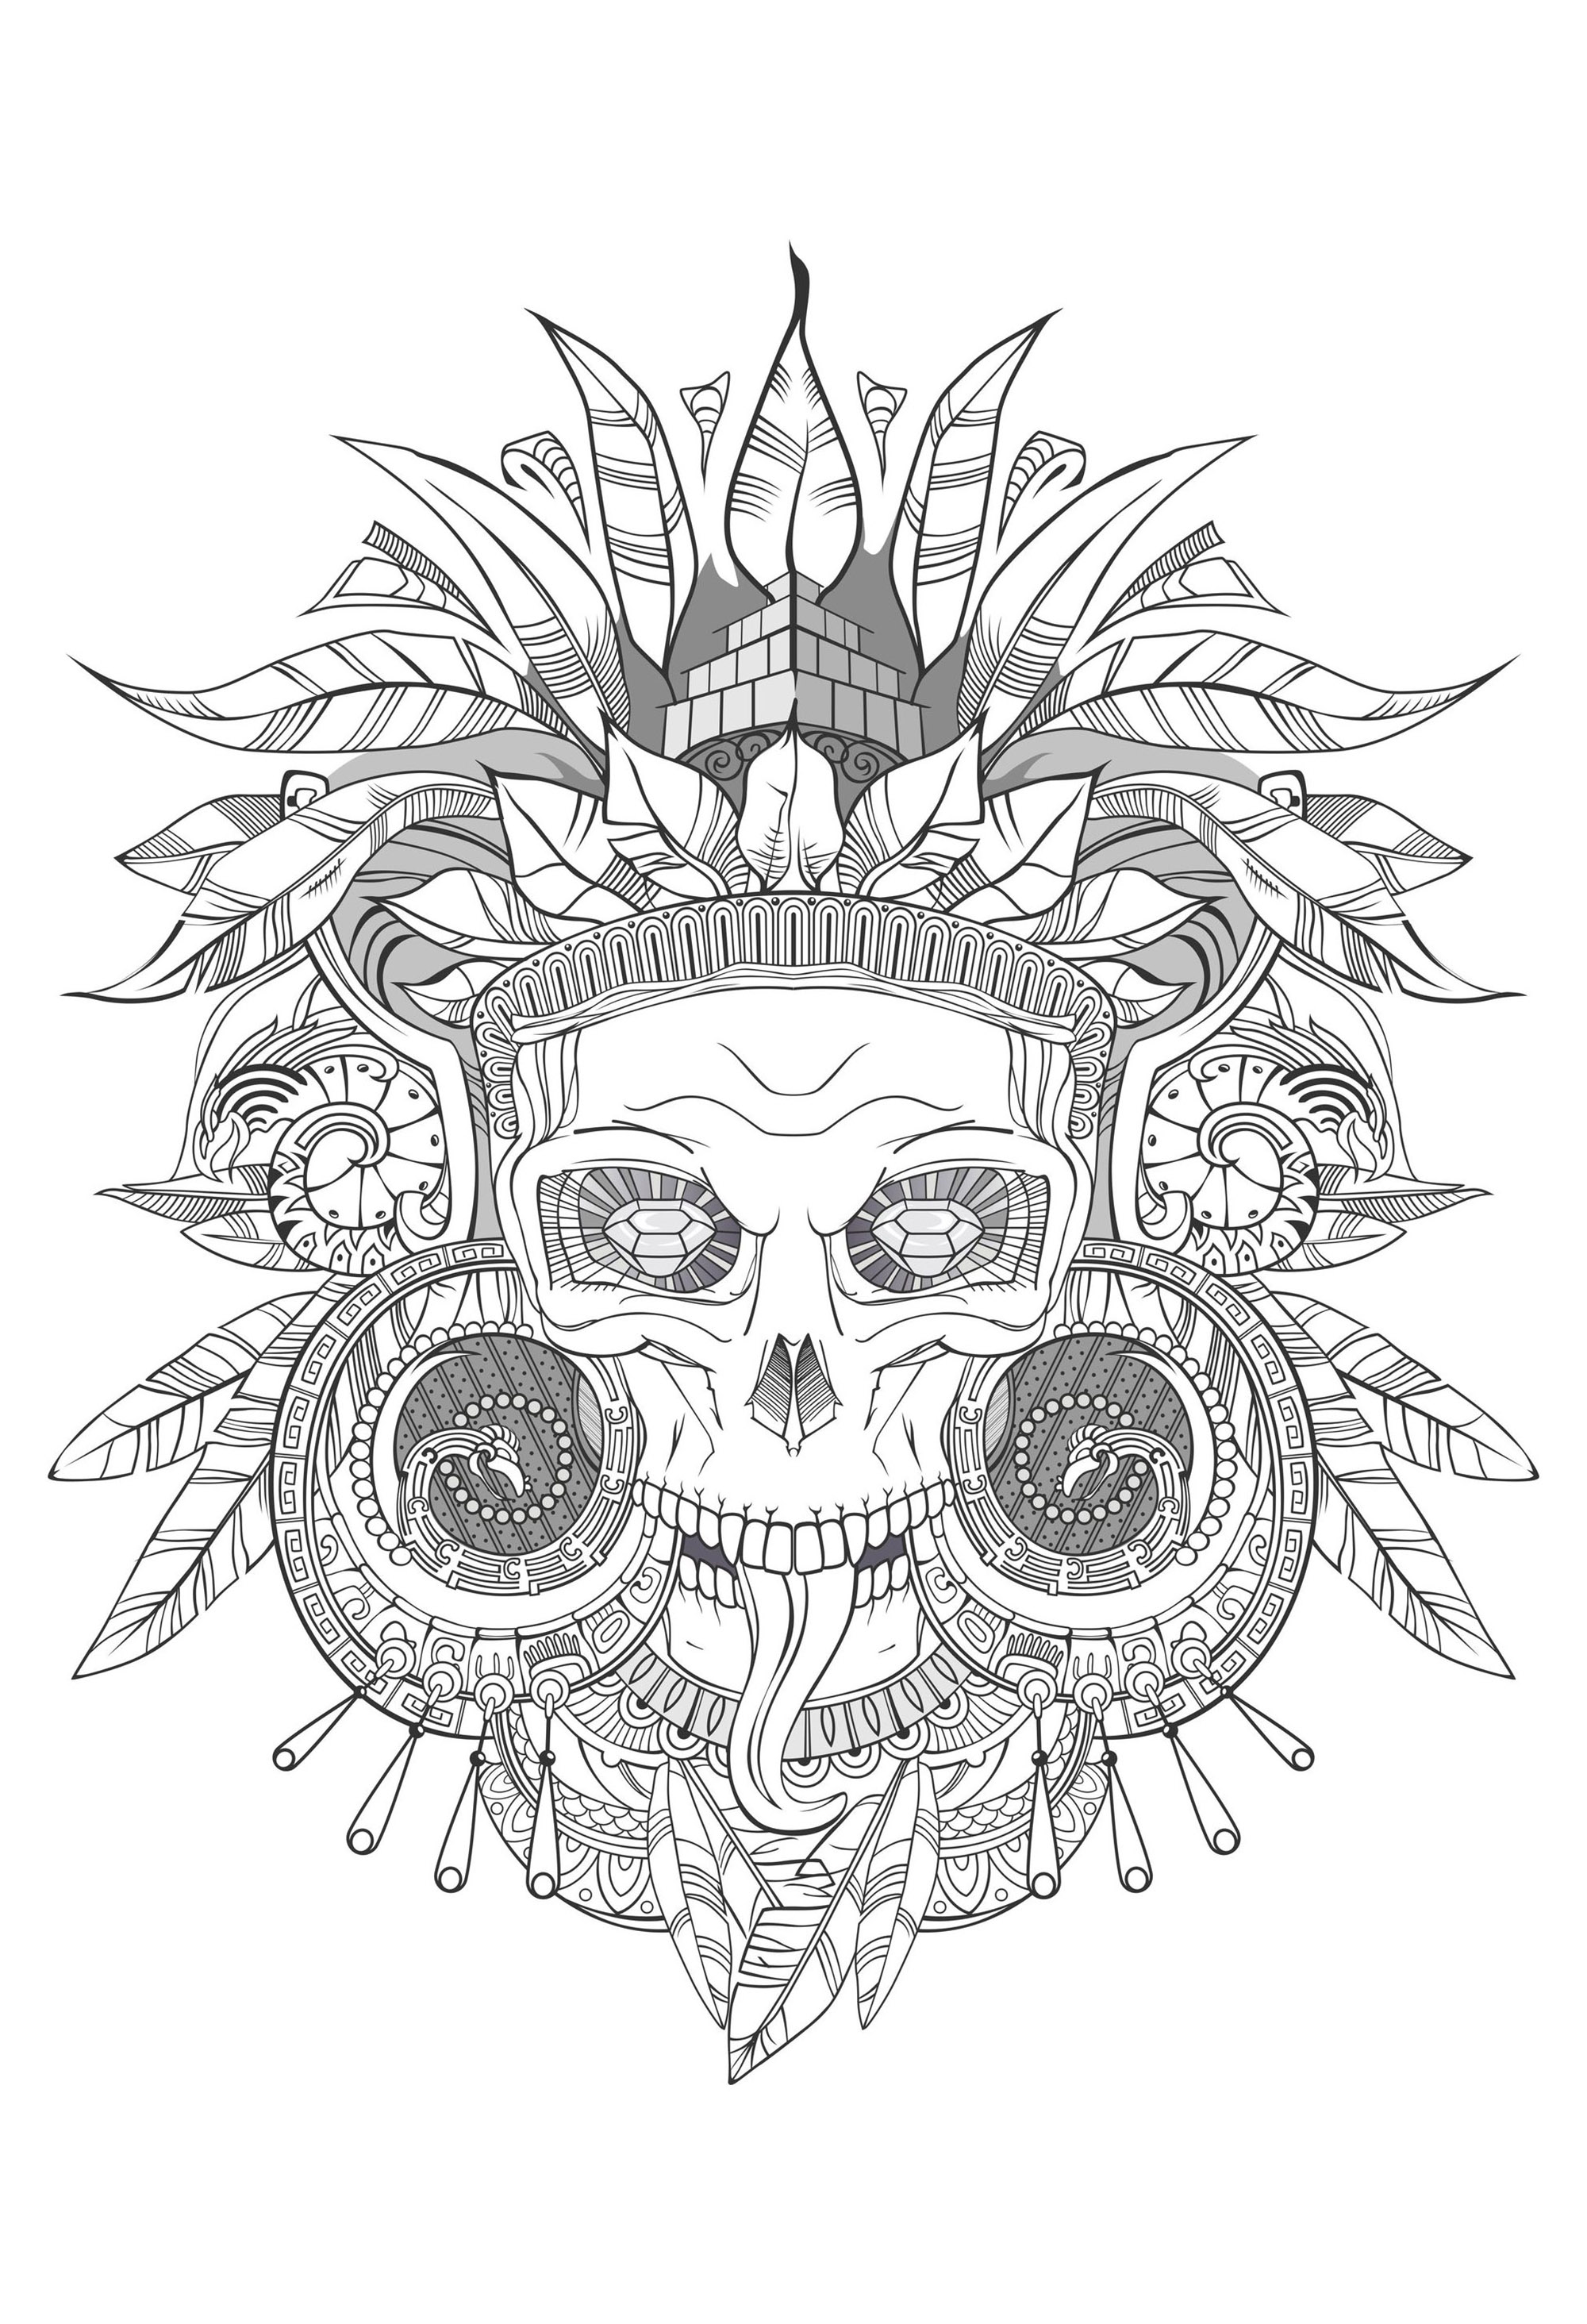 Incredible Aztec skull - with shades of gray, Source : 123rf   Artist : redspruce